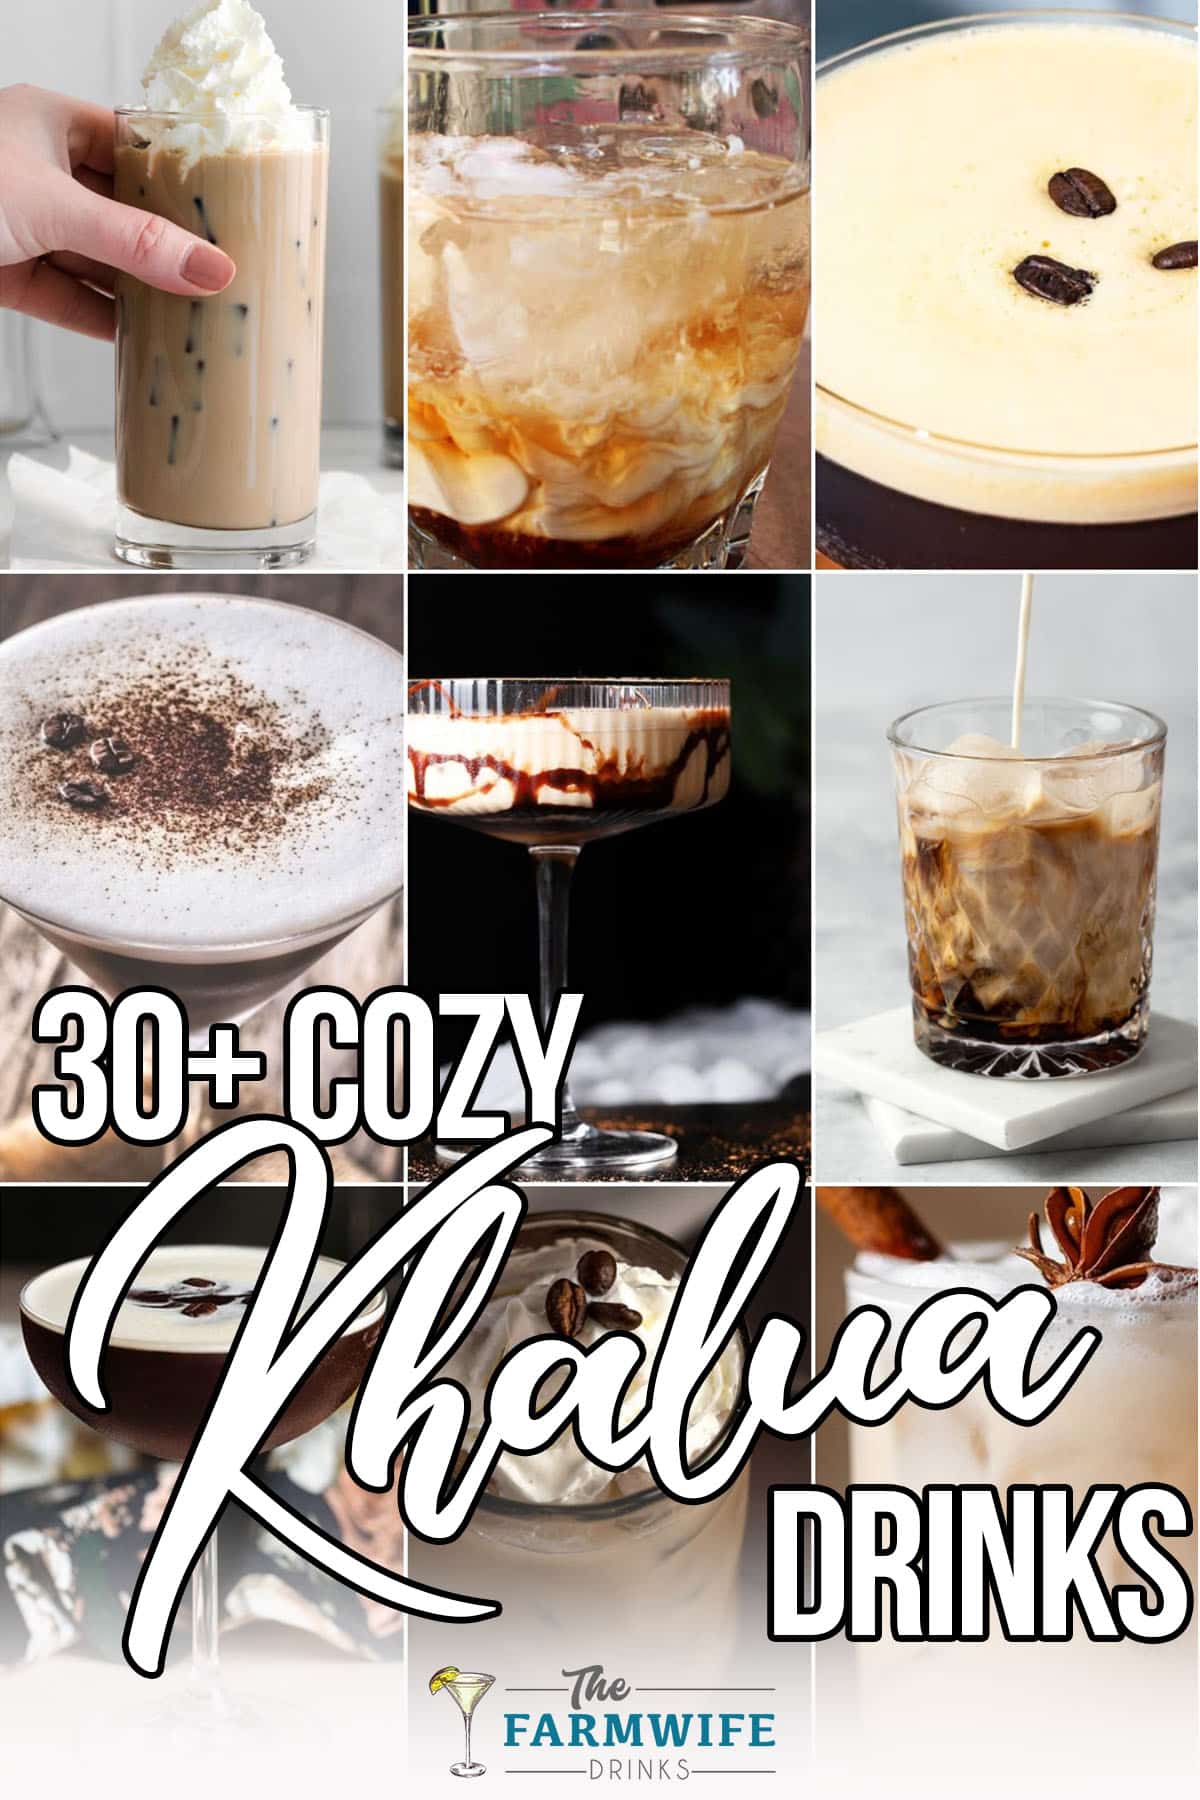 photo collage of drinks made with khalua liqueur with text which reads 30+ cozy khalua drinks